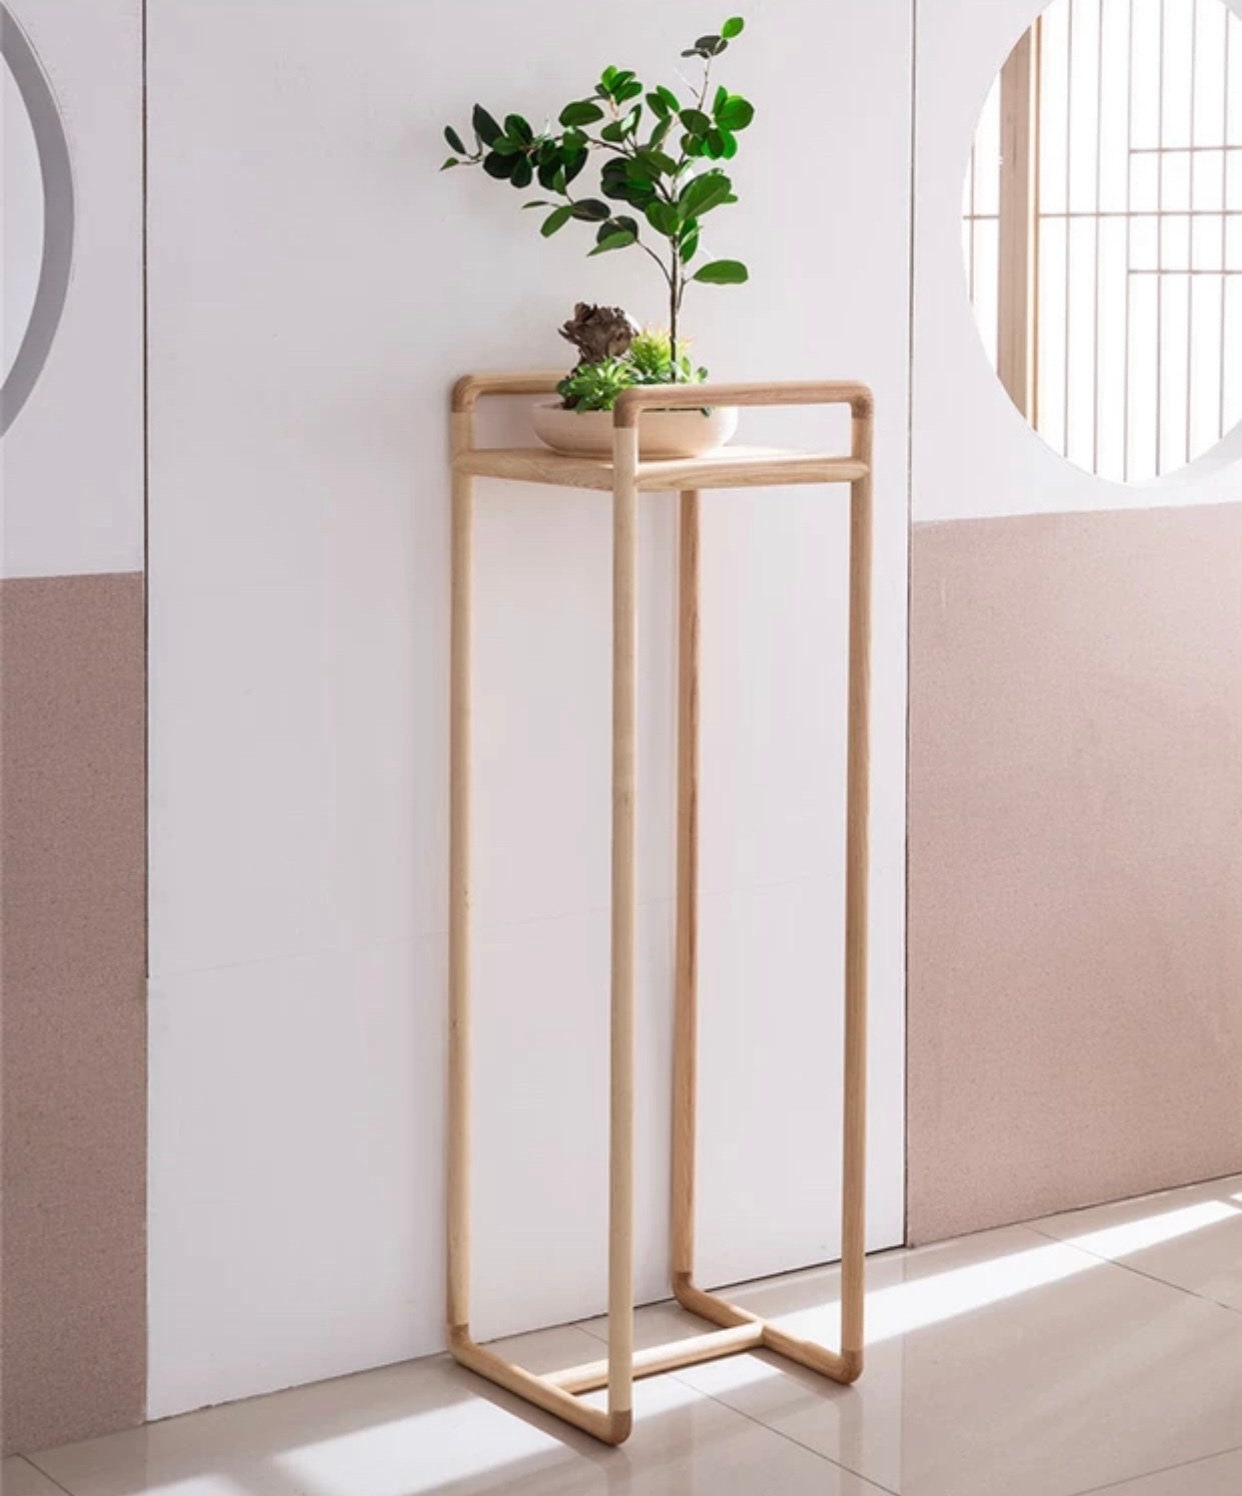 Plant Stand Pot Stand, pot Hand Made in Solid wood, Stylish Plant Stand Indoor Tall Plant Shelf Metal Tiered Hanging Shelf - SlabstudioHongKong